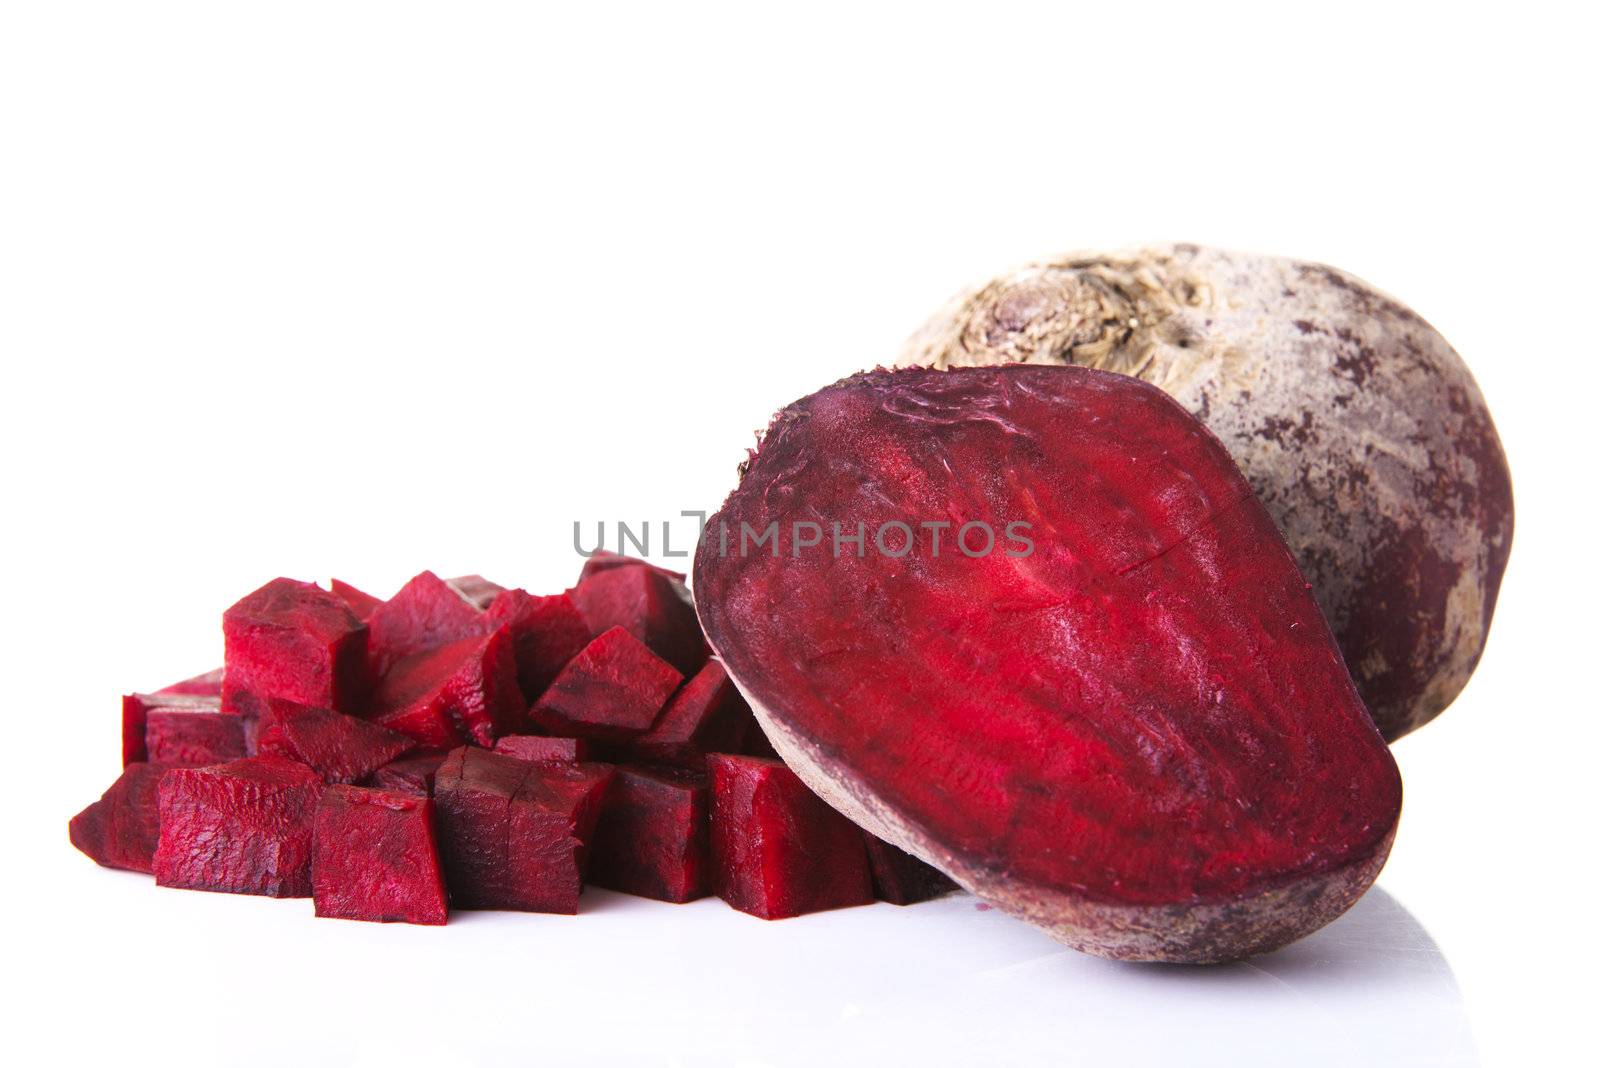 Red beets by BDS